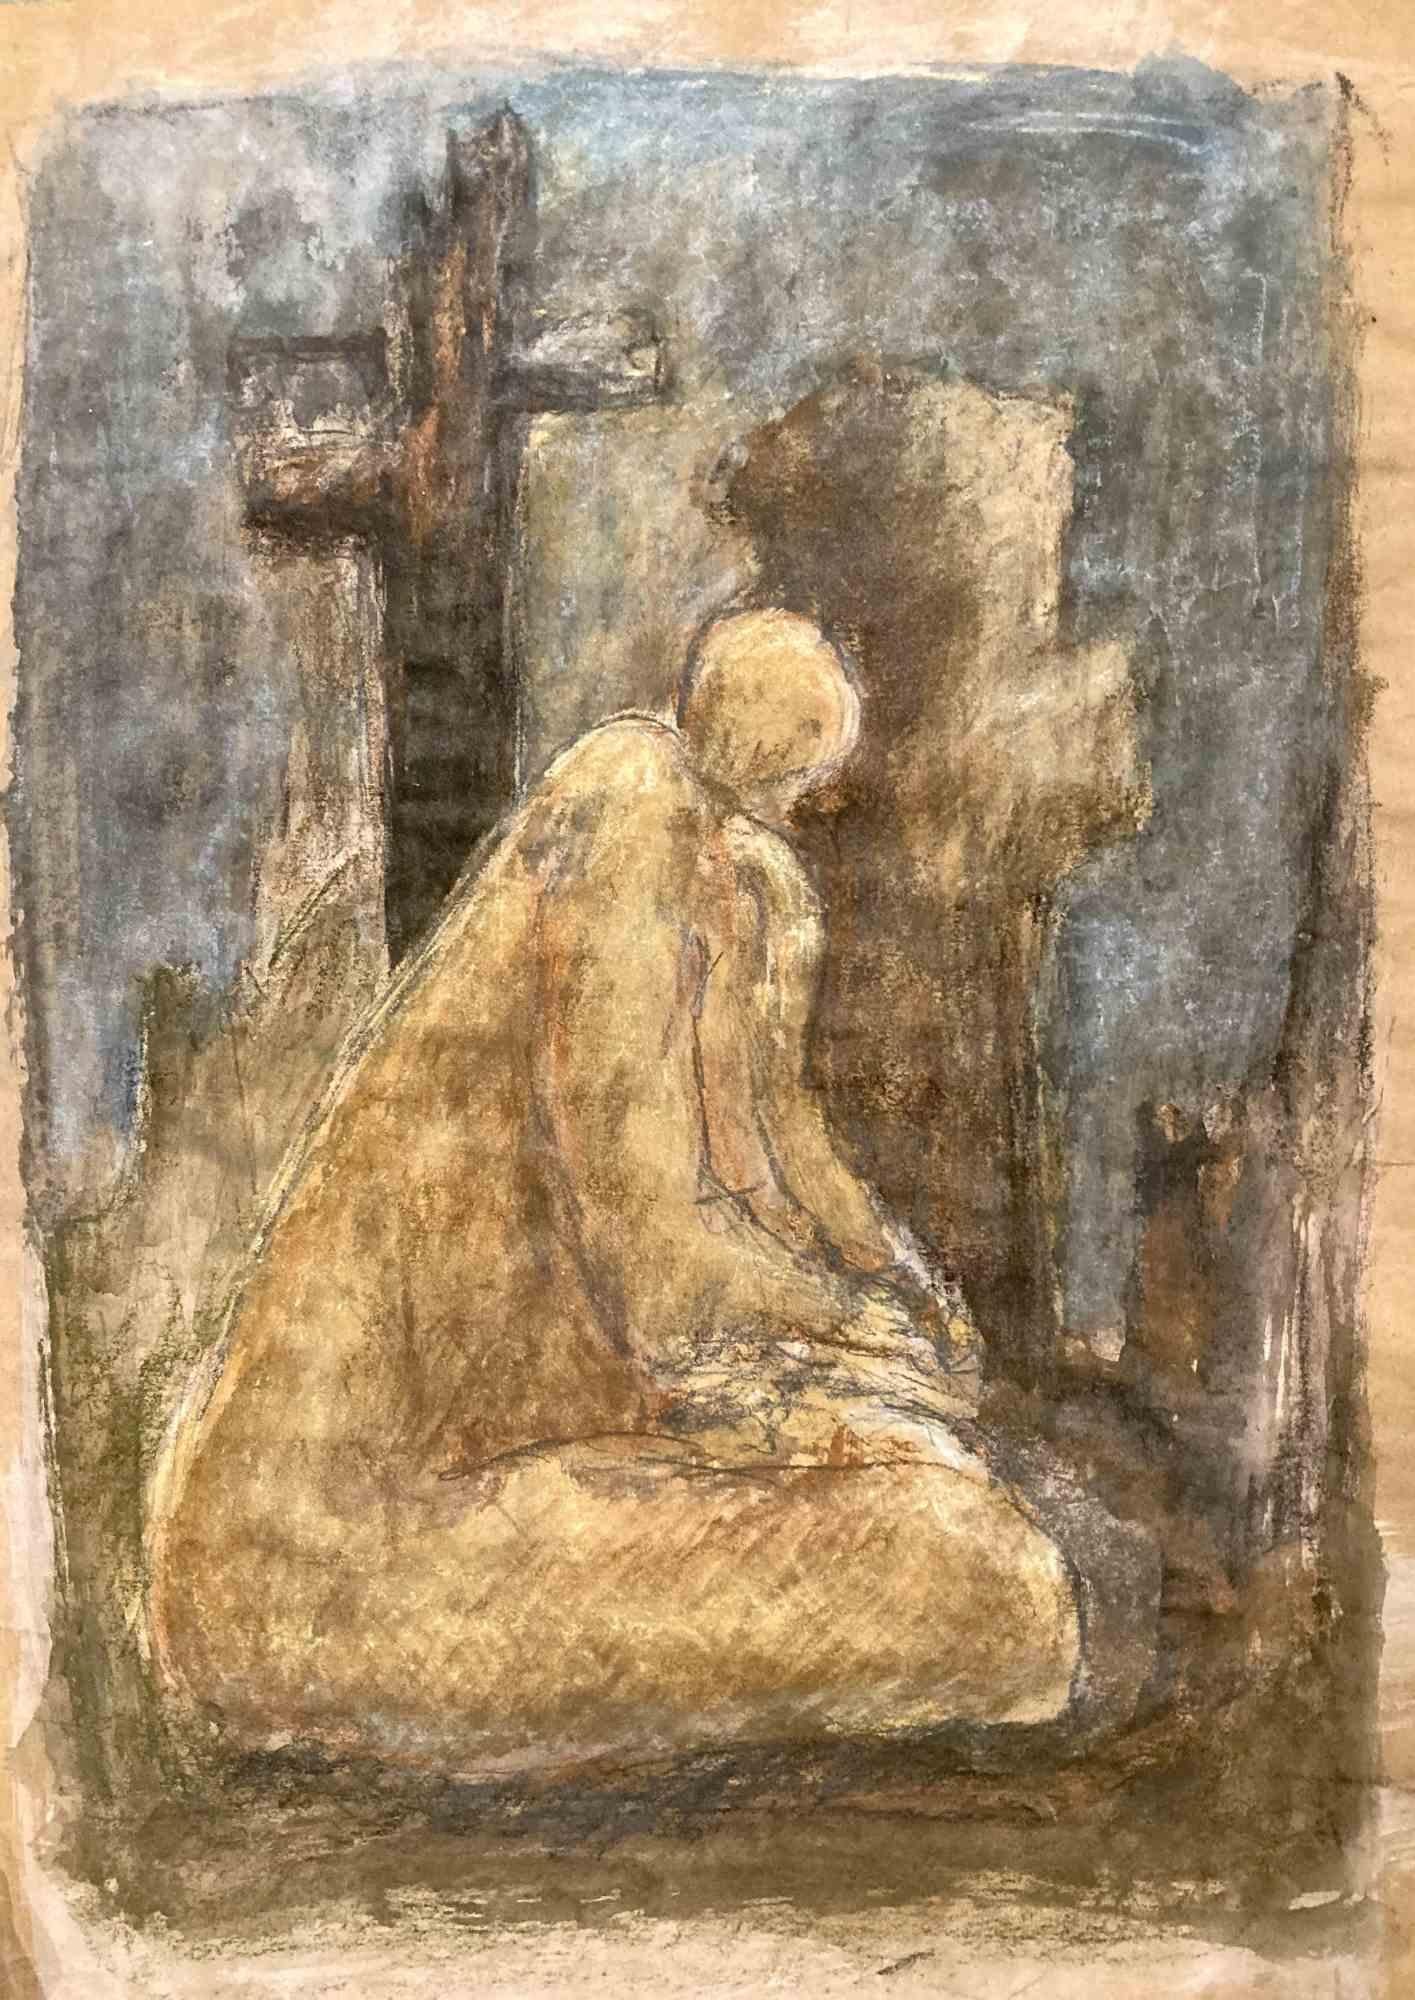 Charcoal, Gouache, Pastel on paper.

In this mixed media drawing, a balled headed human figure is sitting on the ground in a meditative posture appearing to be either praying or contemplating. In the back ground of the figure a dystopic landscape of